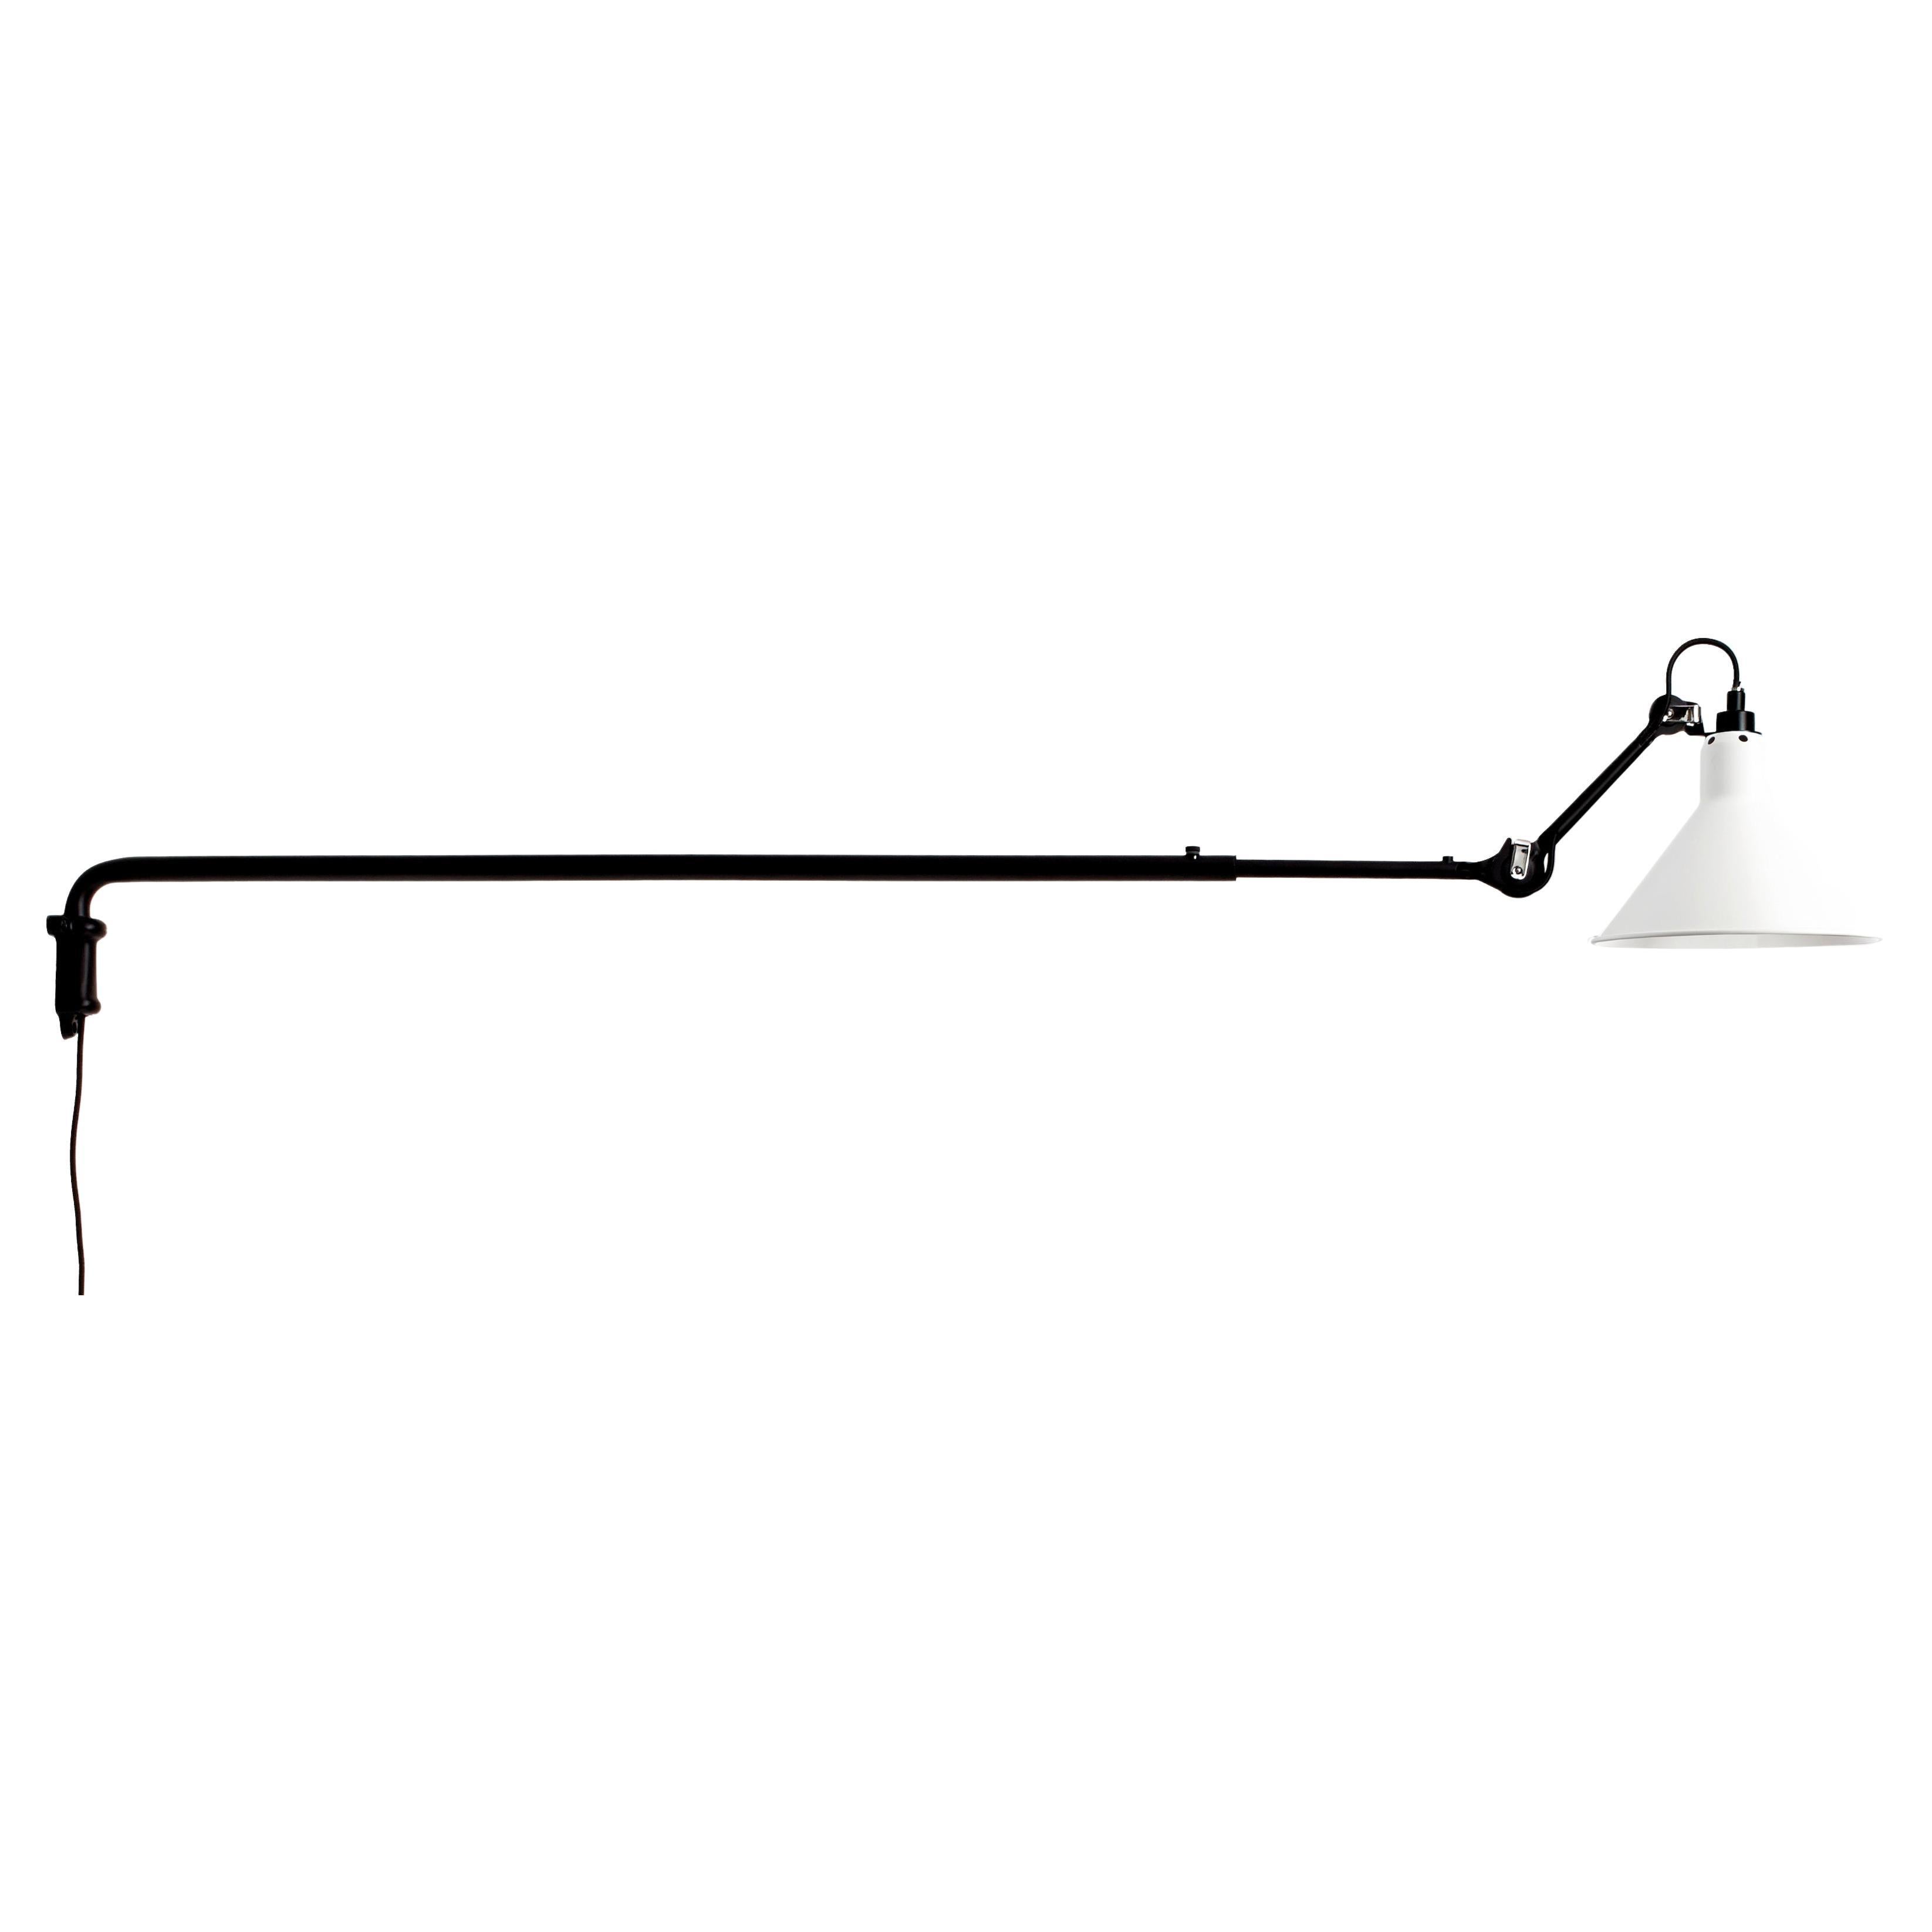 DCW Editions La Lampe Gras N°213 Wall Lamp in Black Arm and White Shade For Sale